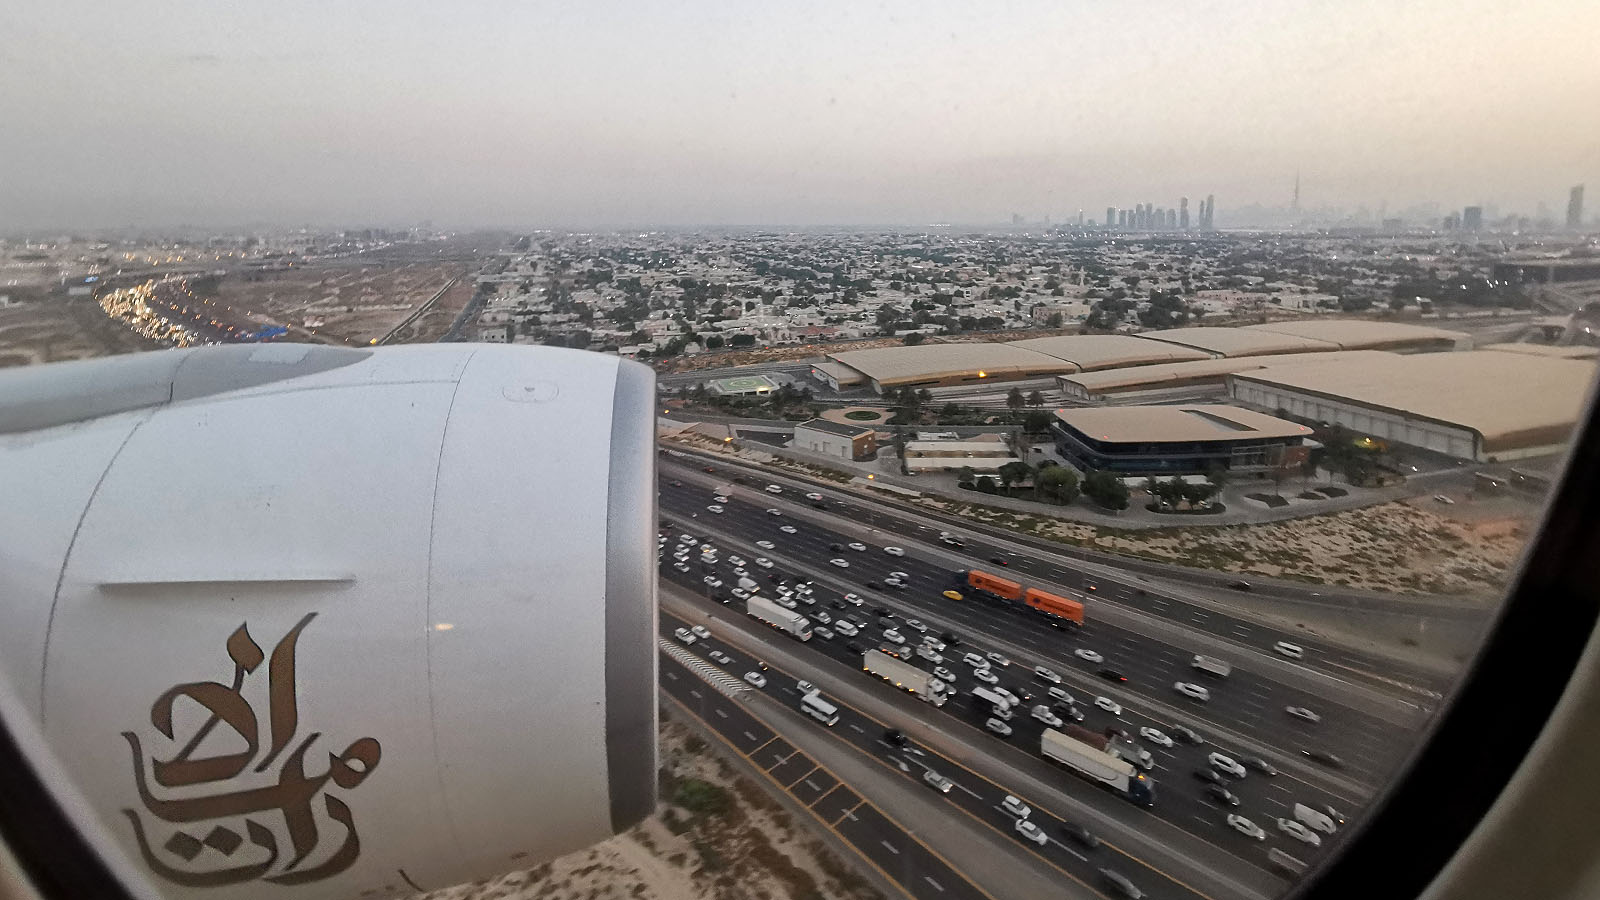 Arriving in the UAE flying Emirates Boeing 777 Business Class